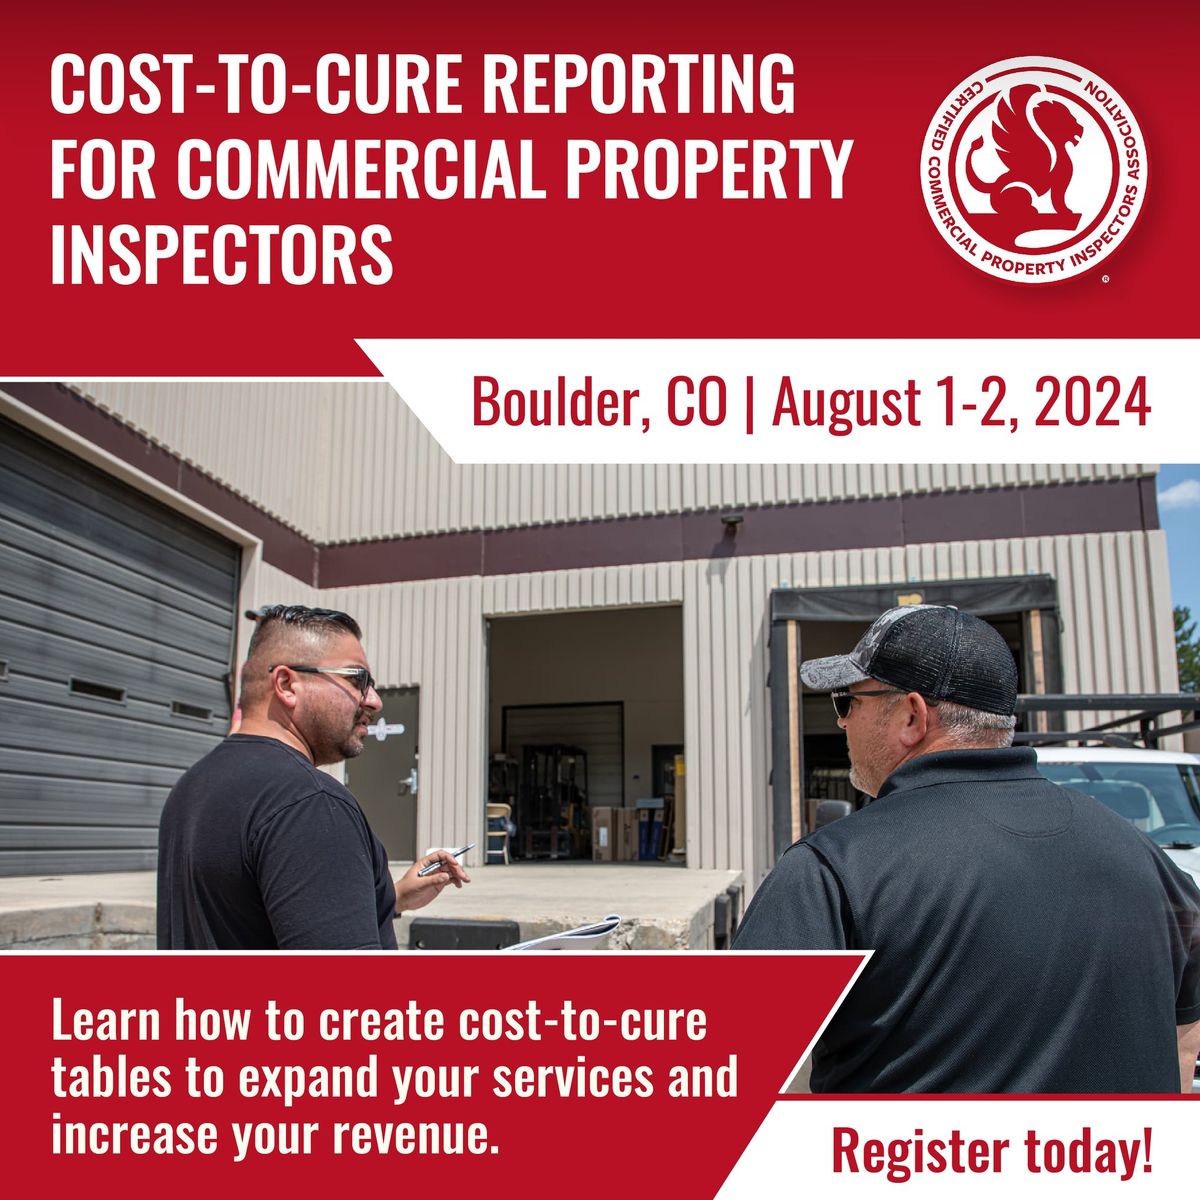 Cost-to-Cure Reporting for Commercial Property Inspectors